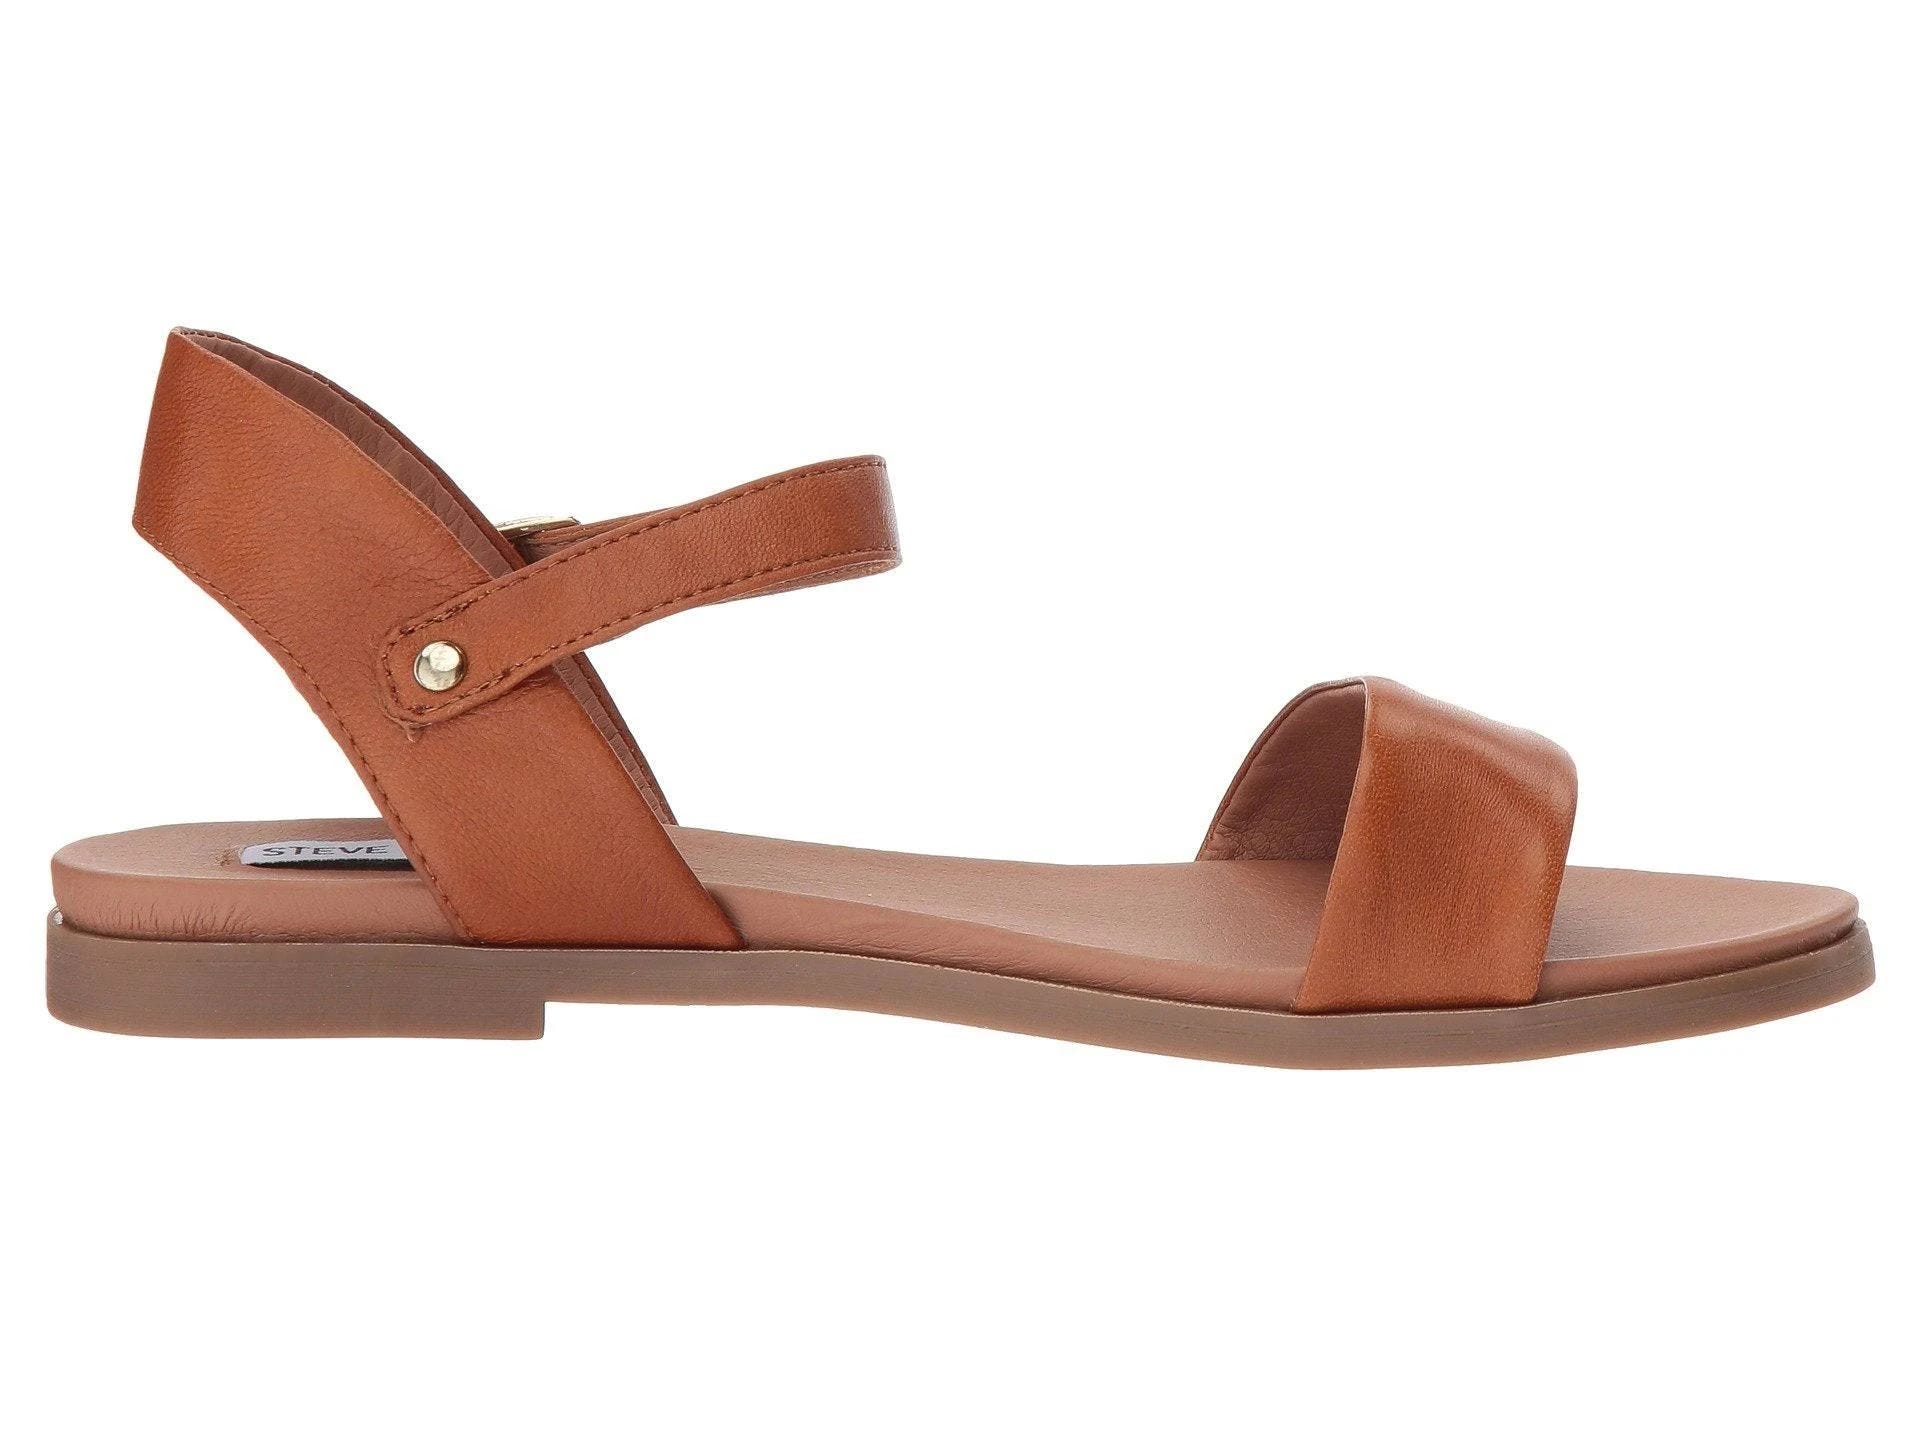 Chic tan leather sandals with adjustable buckle closure and cushioned footbed | Image